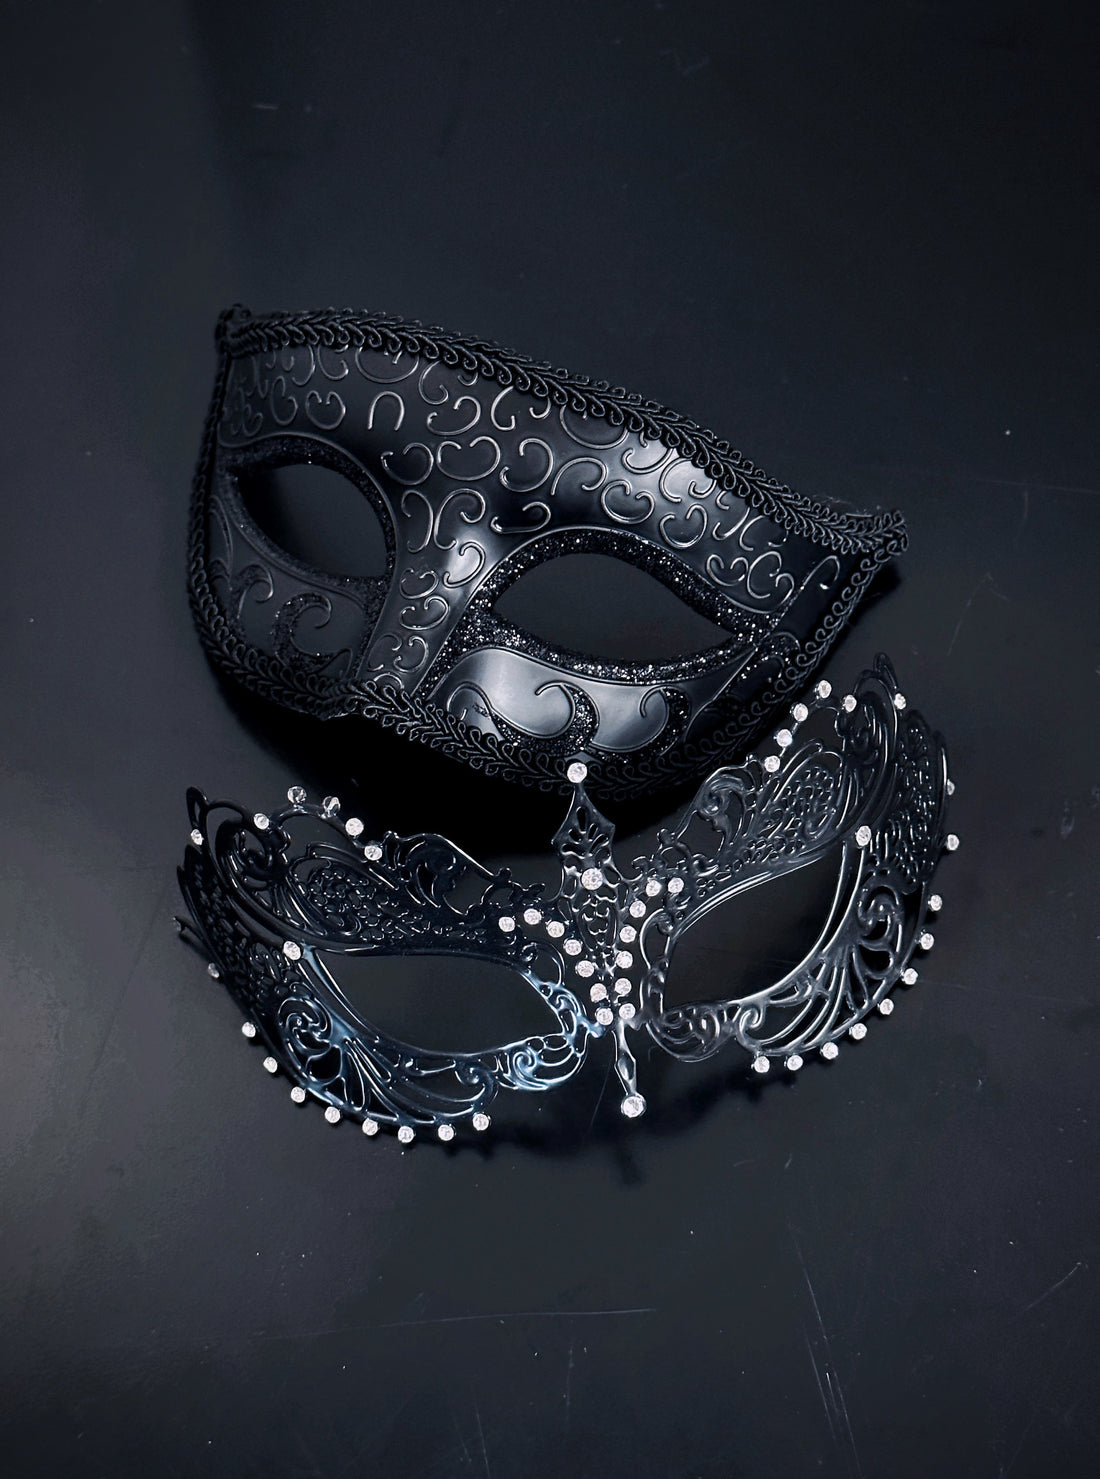 Couples masquerade mask pair in black for sale.